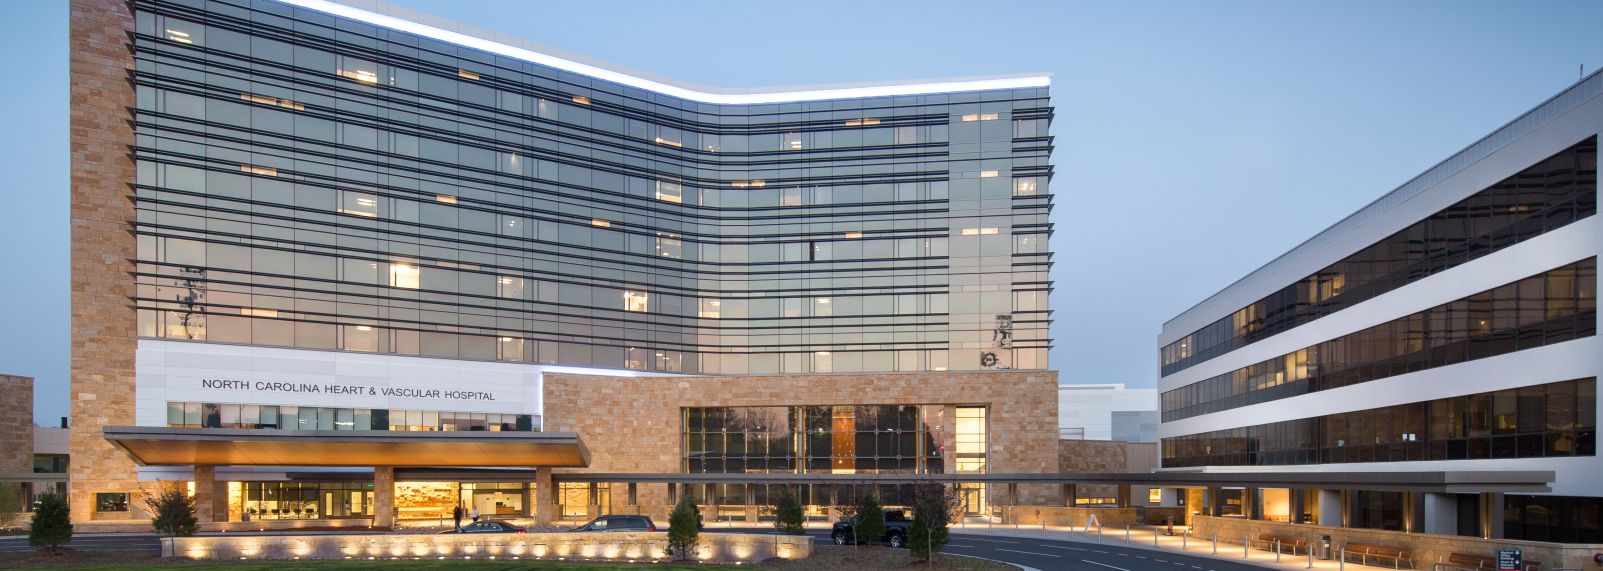 Primary Hospitals in Raleigh, N.C.